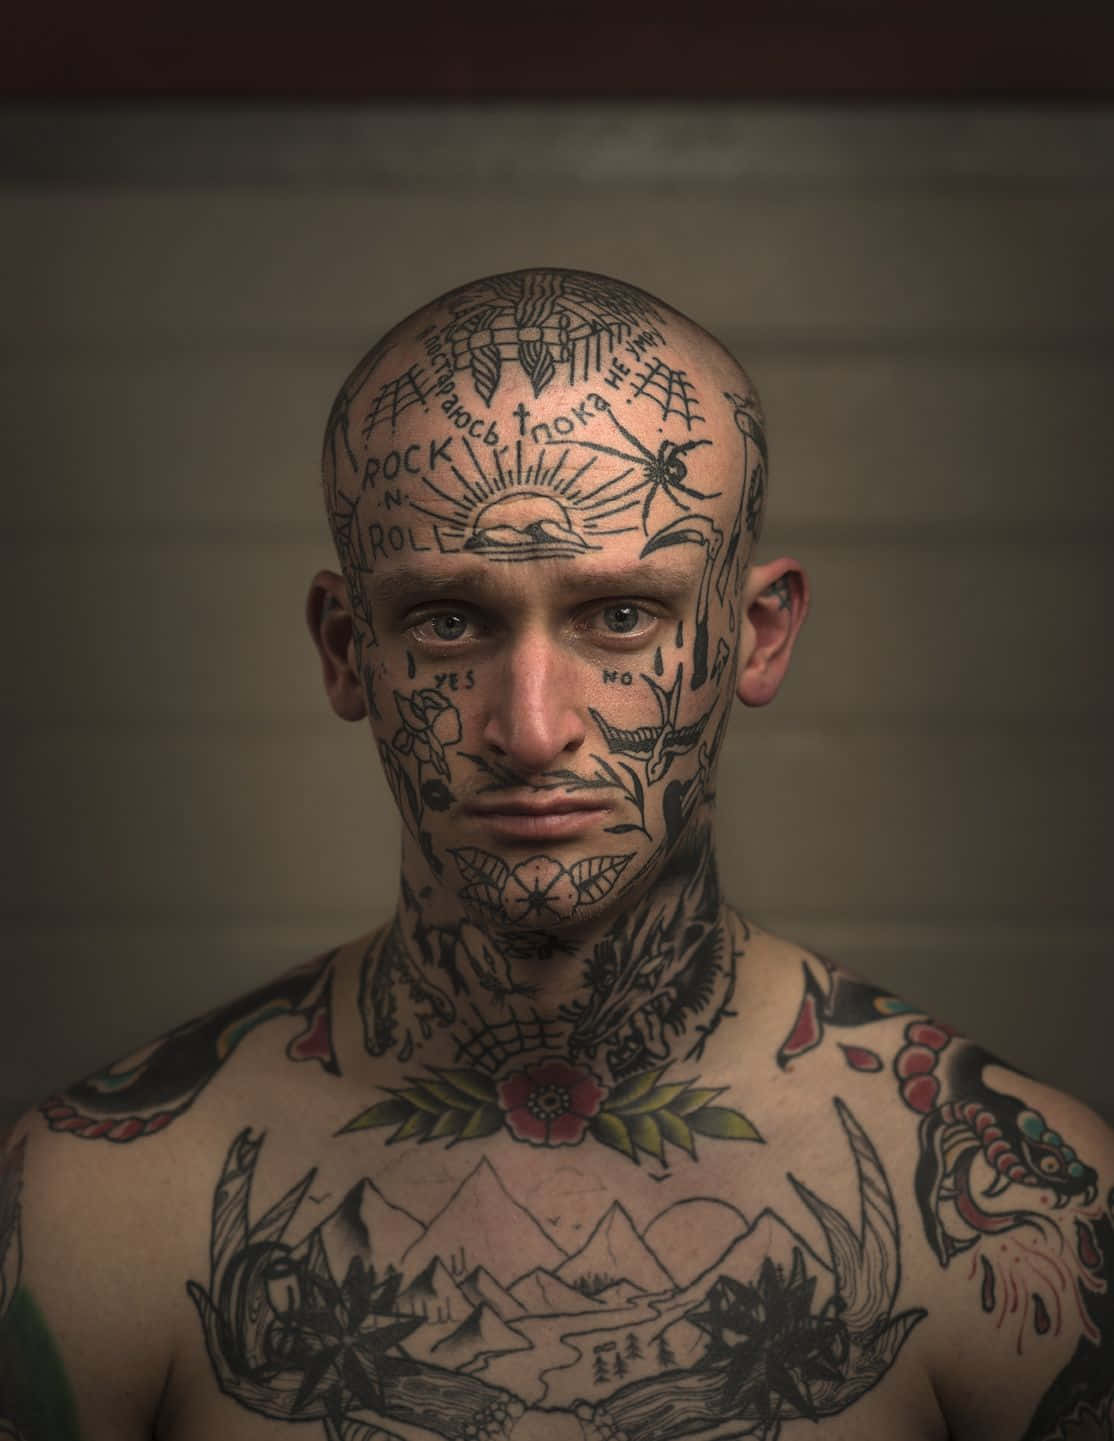 A Man With Tattoos On His Head